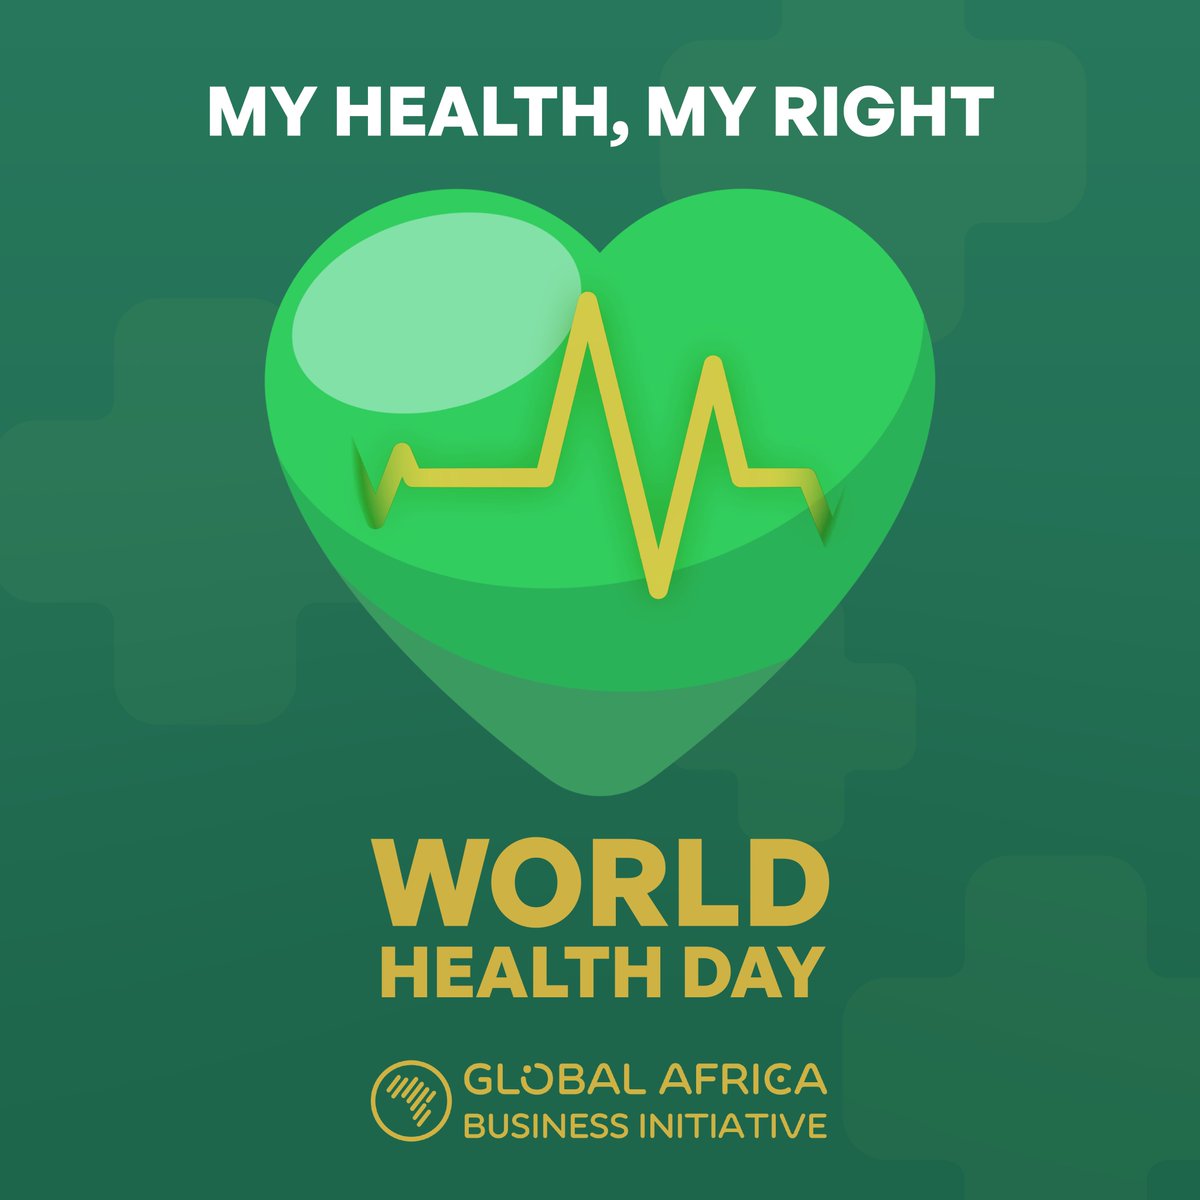 This #WorldHealthDay GABI applauds Africa's progress & remains committed to supporting health security, innovation & access for all. Join us in championing African-led solutions for a healthier, more prosperous Africa! #AfricaRising #UnstoppableAfrica UN @GlobalCompact